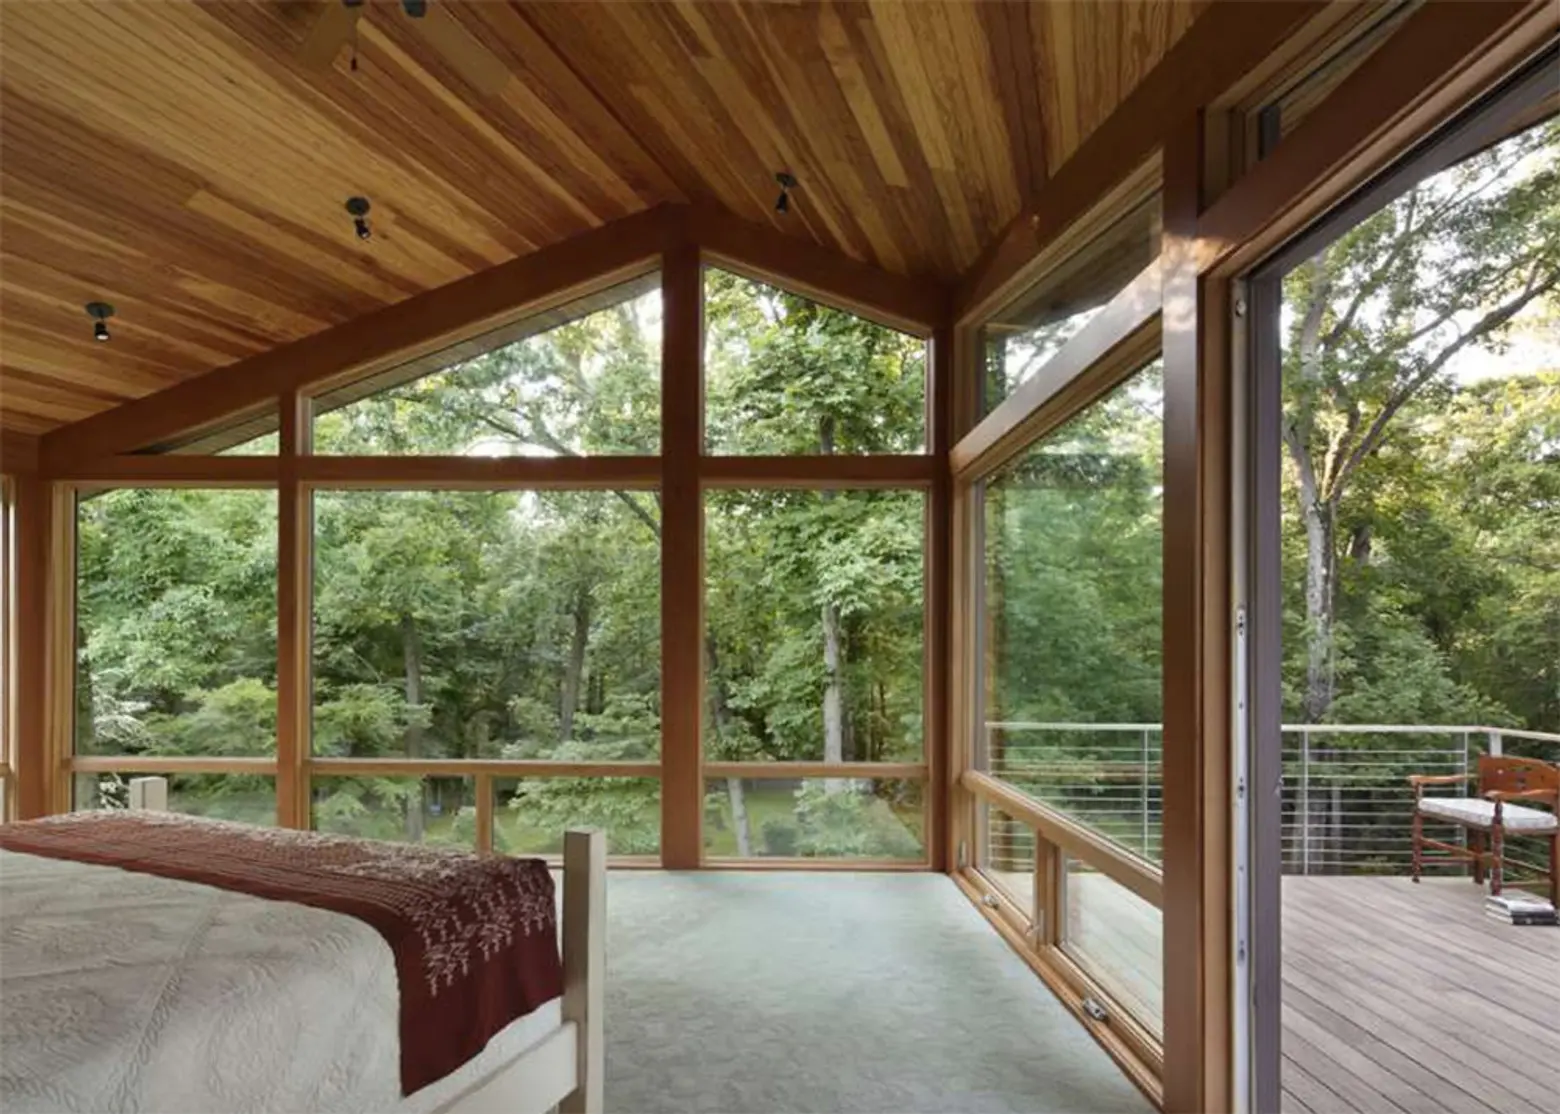 Architect Stephen Moser, treehouse-inspired home, Mamaroneck Residence, renovated ranch, 1950s ranch, Mamaroneck, O’Brien Carpentry, 